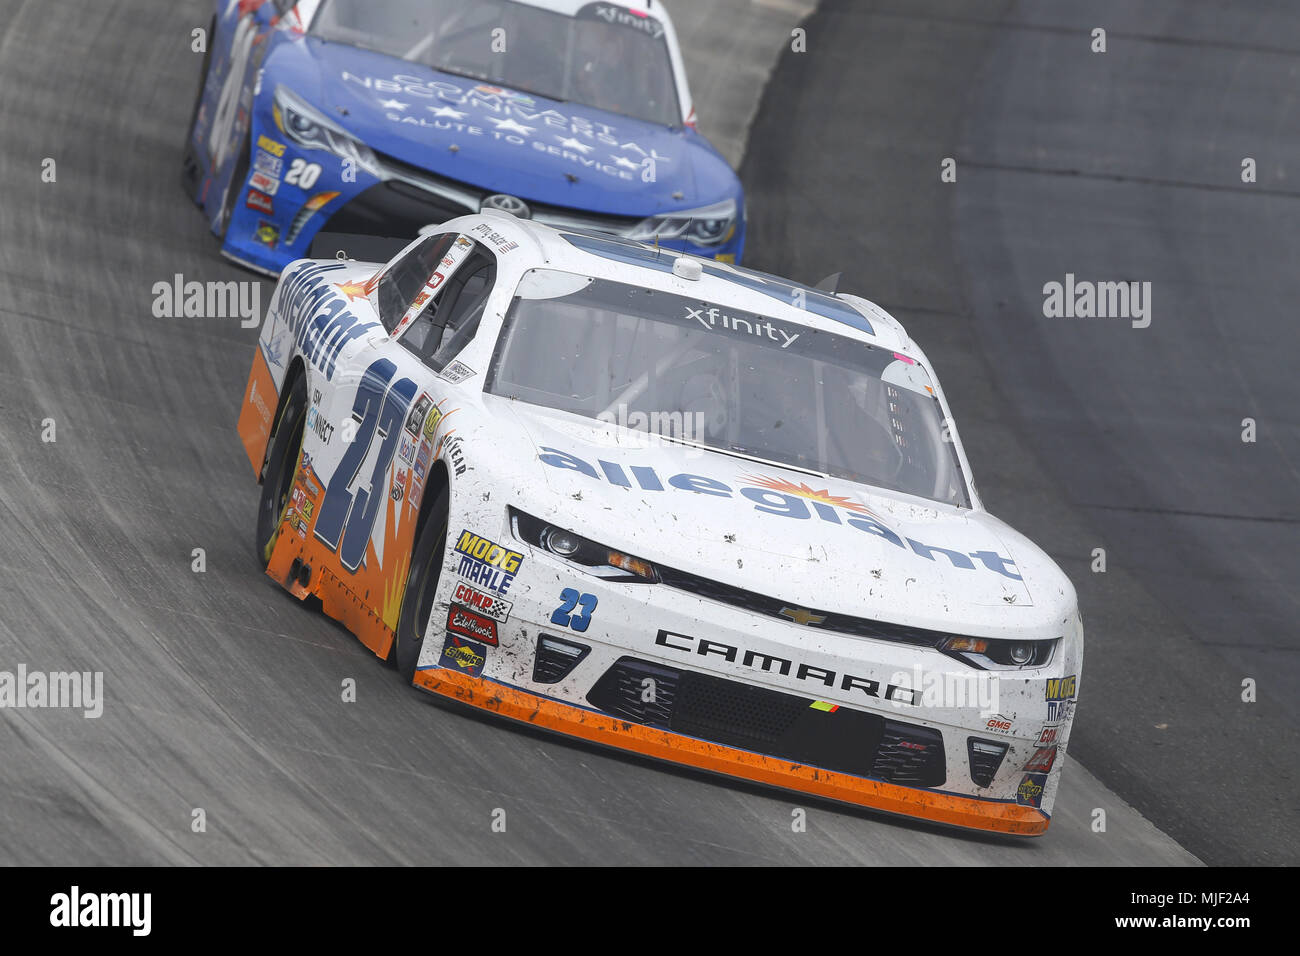 Dover, Delaware, USA. 5th May, 2018. Johnny Sauter (23) brings his car through the turns during the OneMain Financial 200 at Dover International Speedway in Dover, Delaware. Credit: Chris Owens Asp Inc/ASP/ZUMA Wire/Alamy Live News Stock Photo